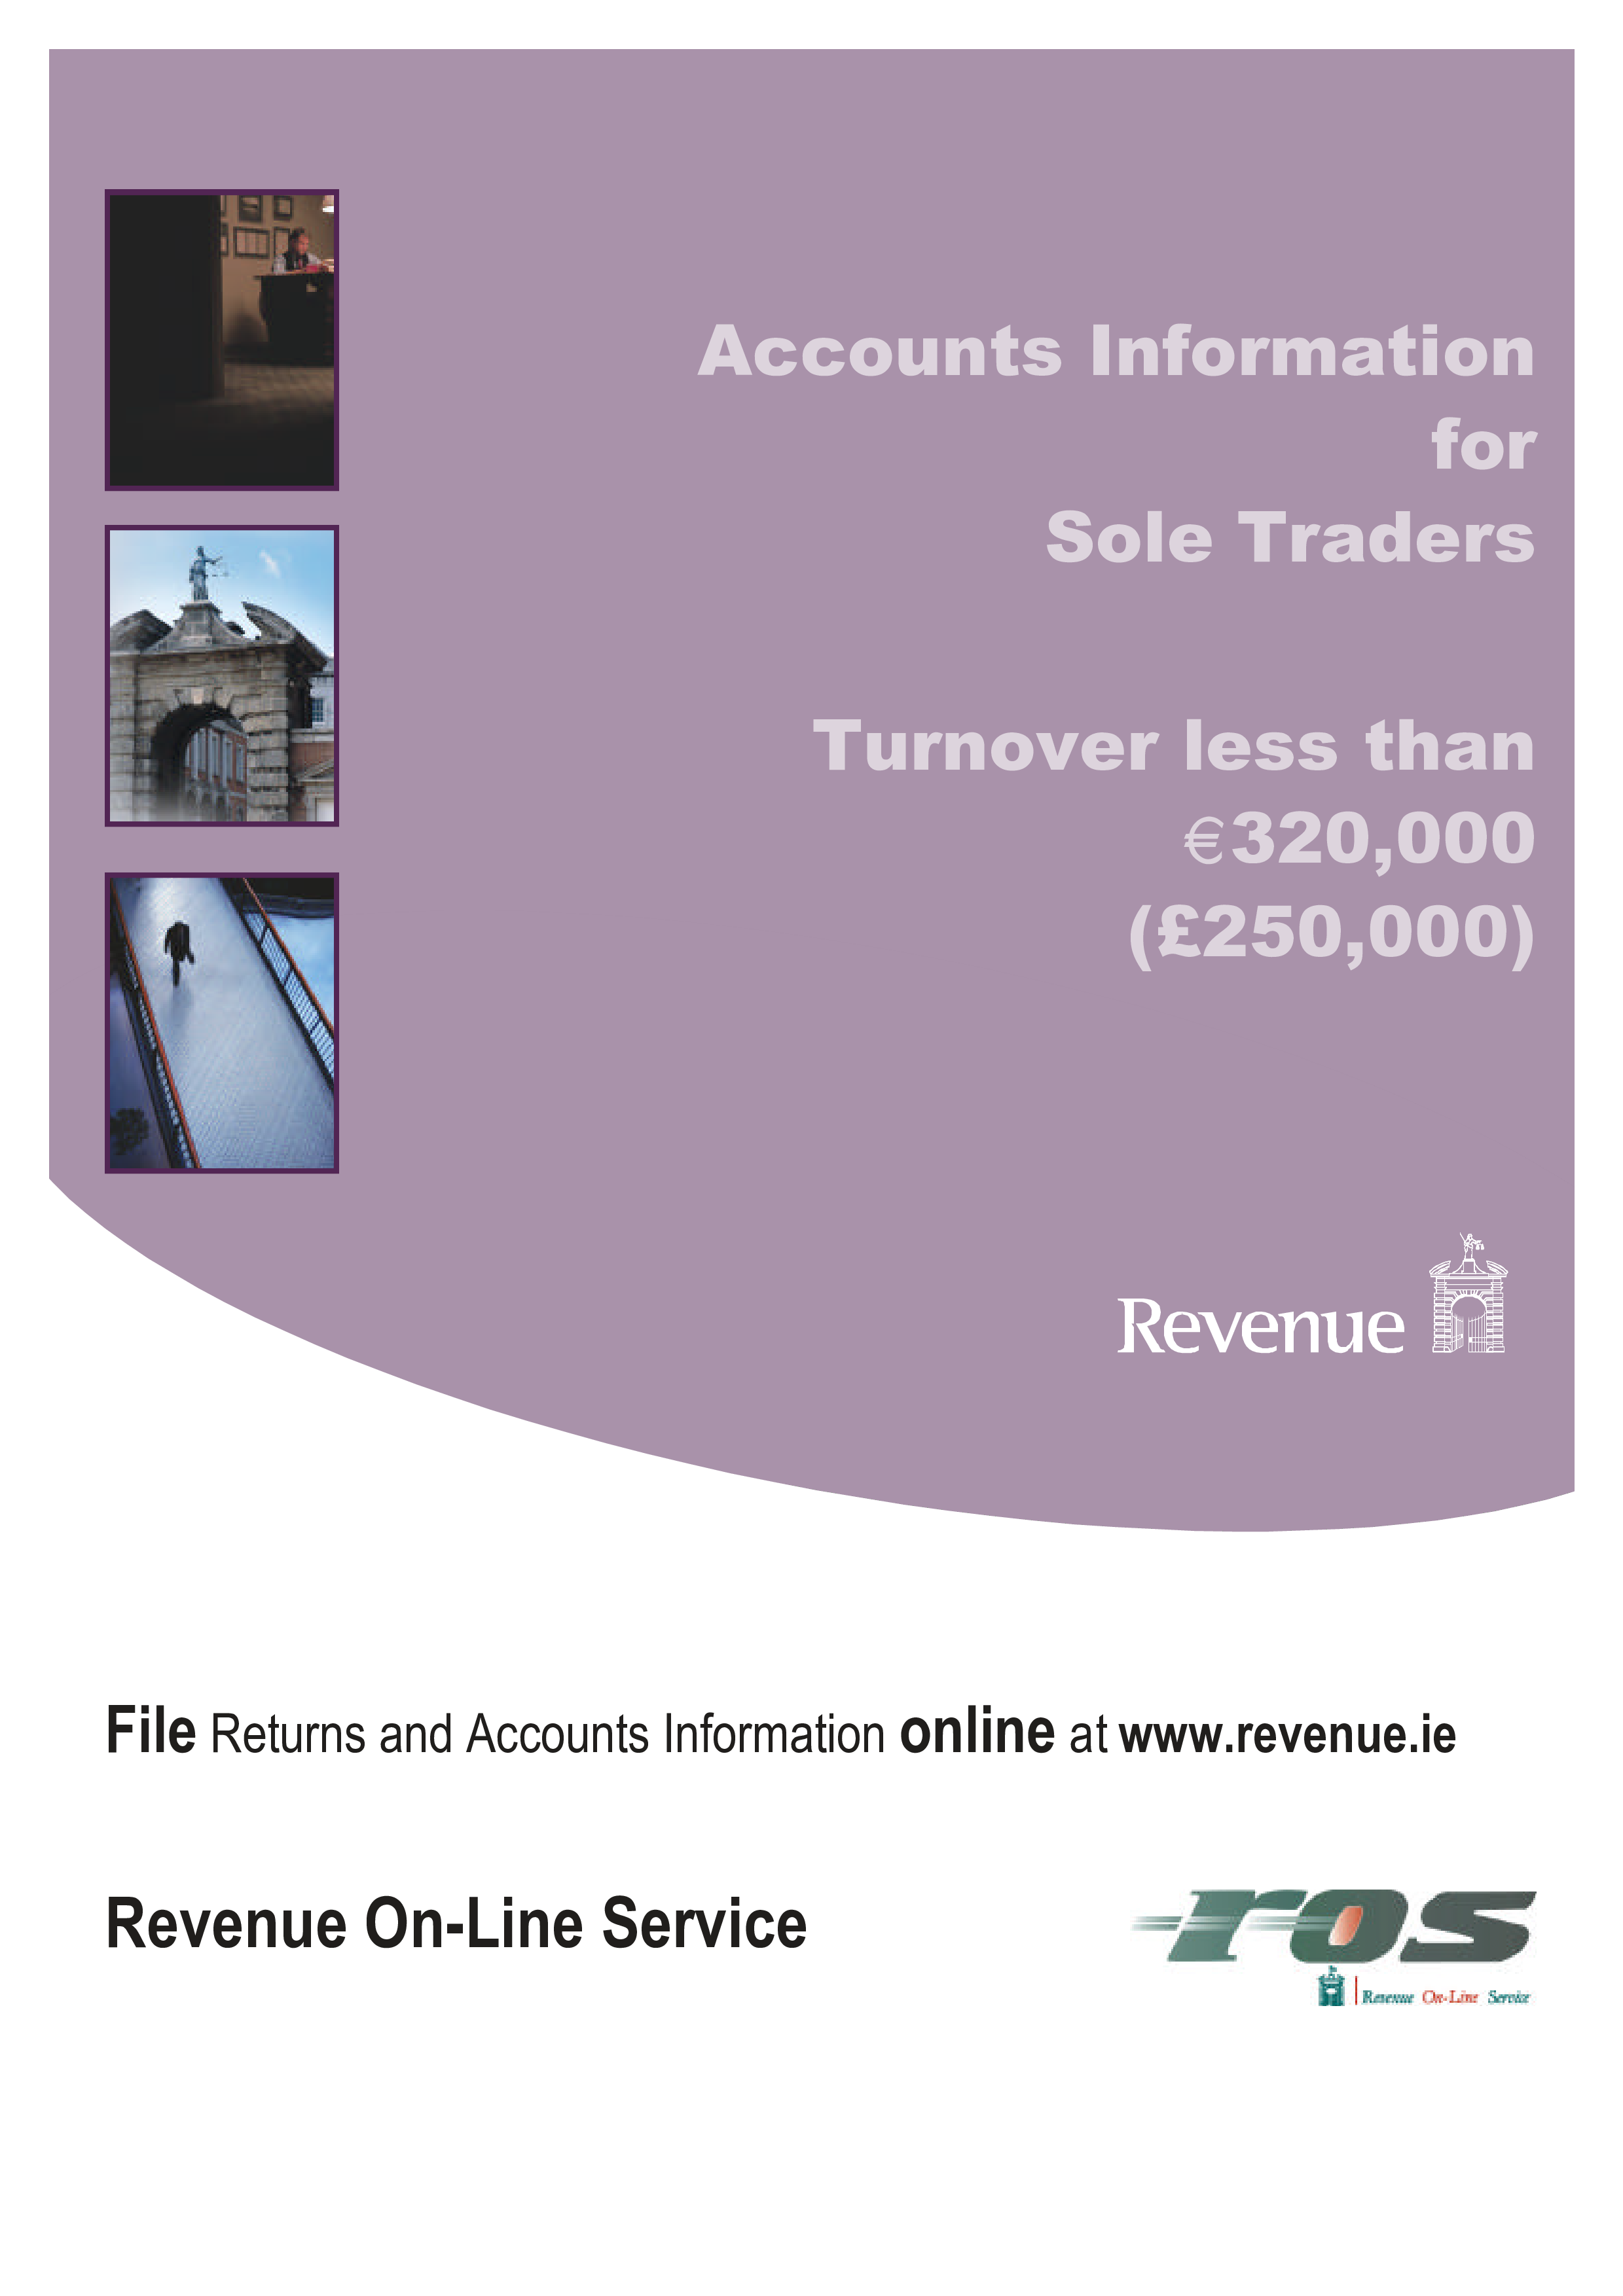 stam 1 - accounts information for sole traders turnover less than £320,000 (£250,000) Hauptschablonenbild